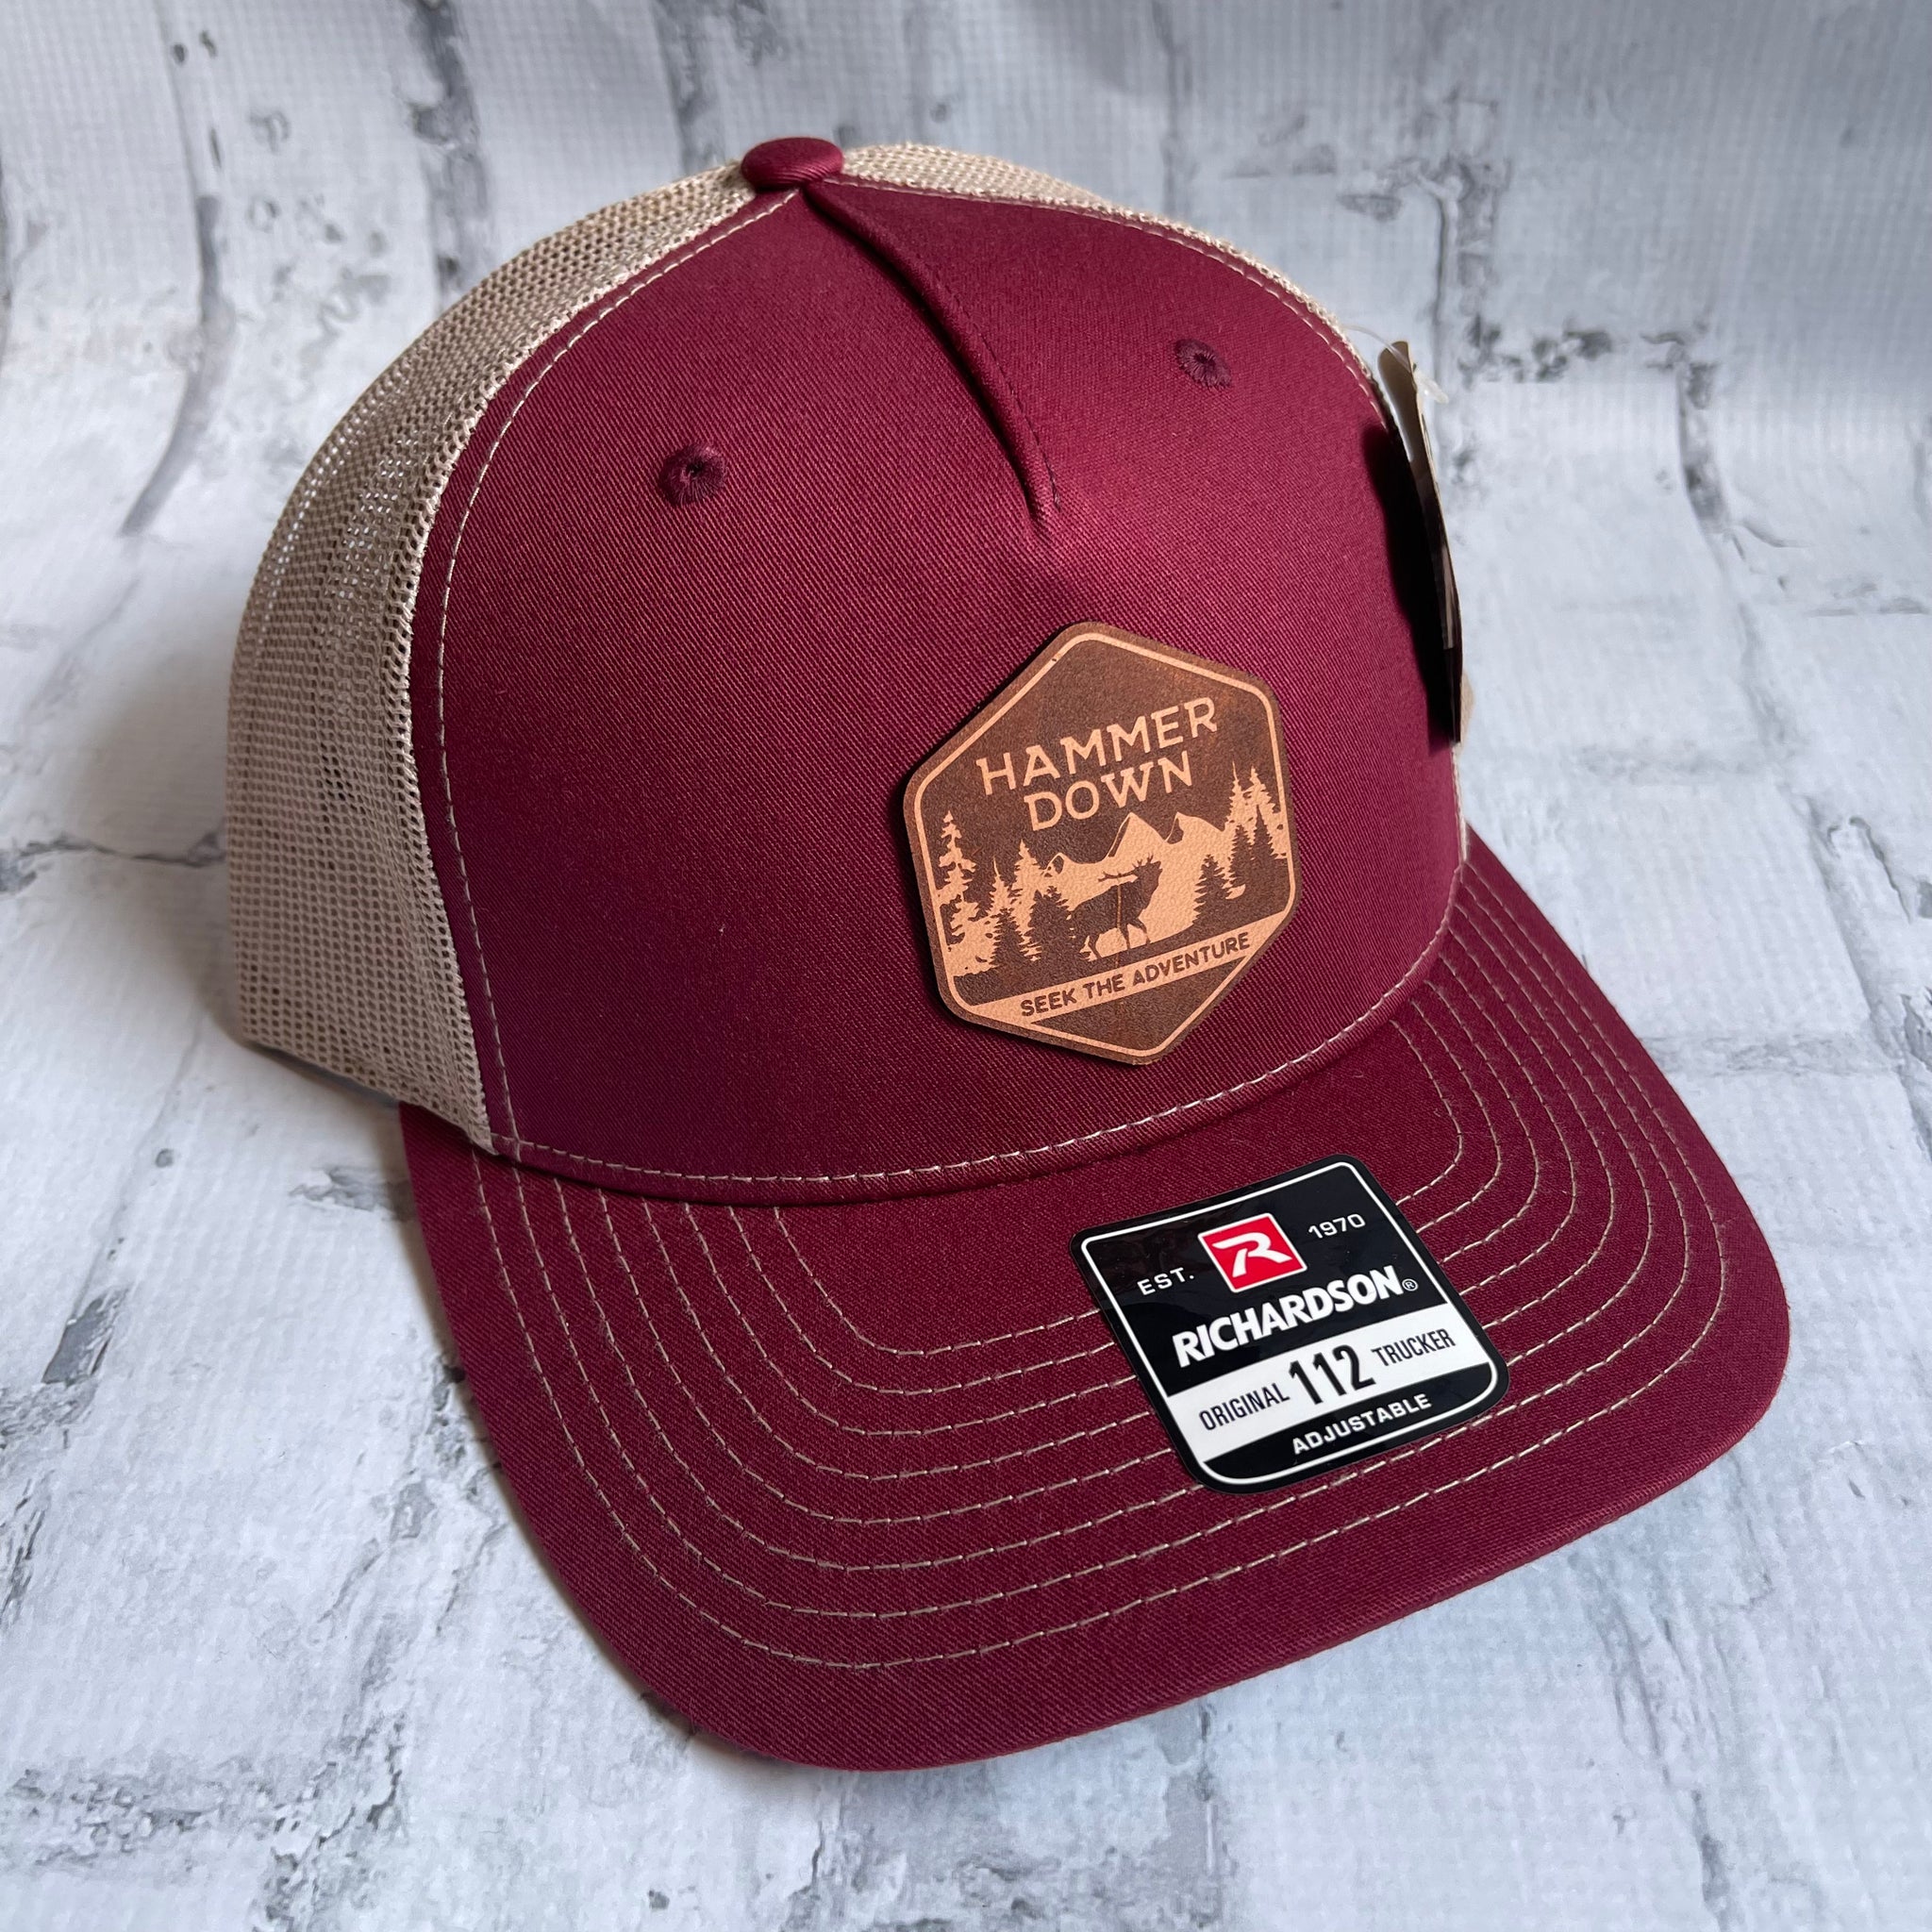 Hammer Down "HD STA" Hat - Cardinal with Leather Patch - Southern Charm "Shop The Charm"